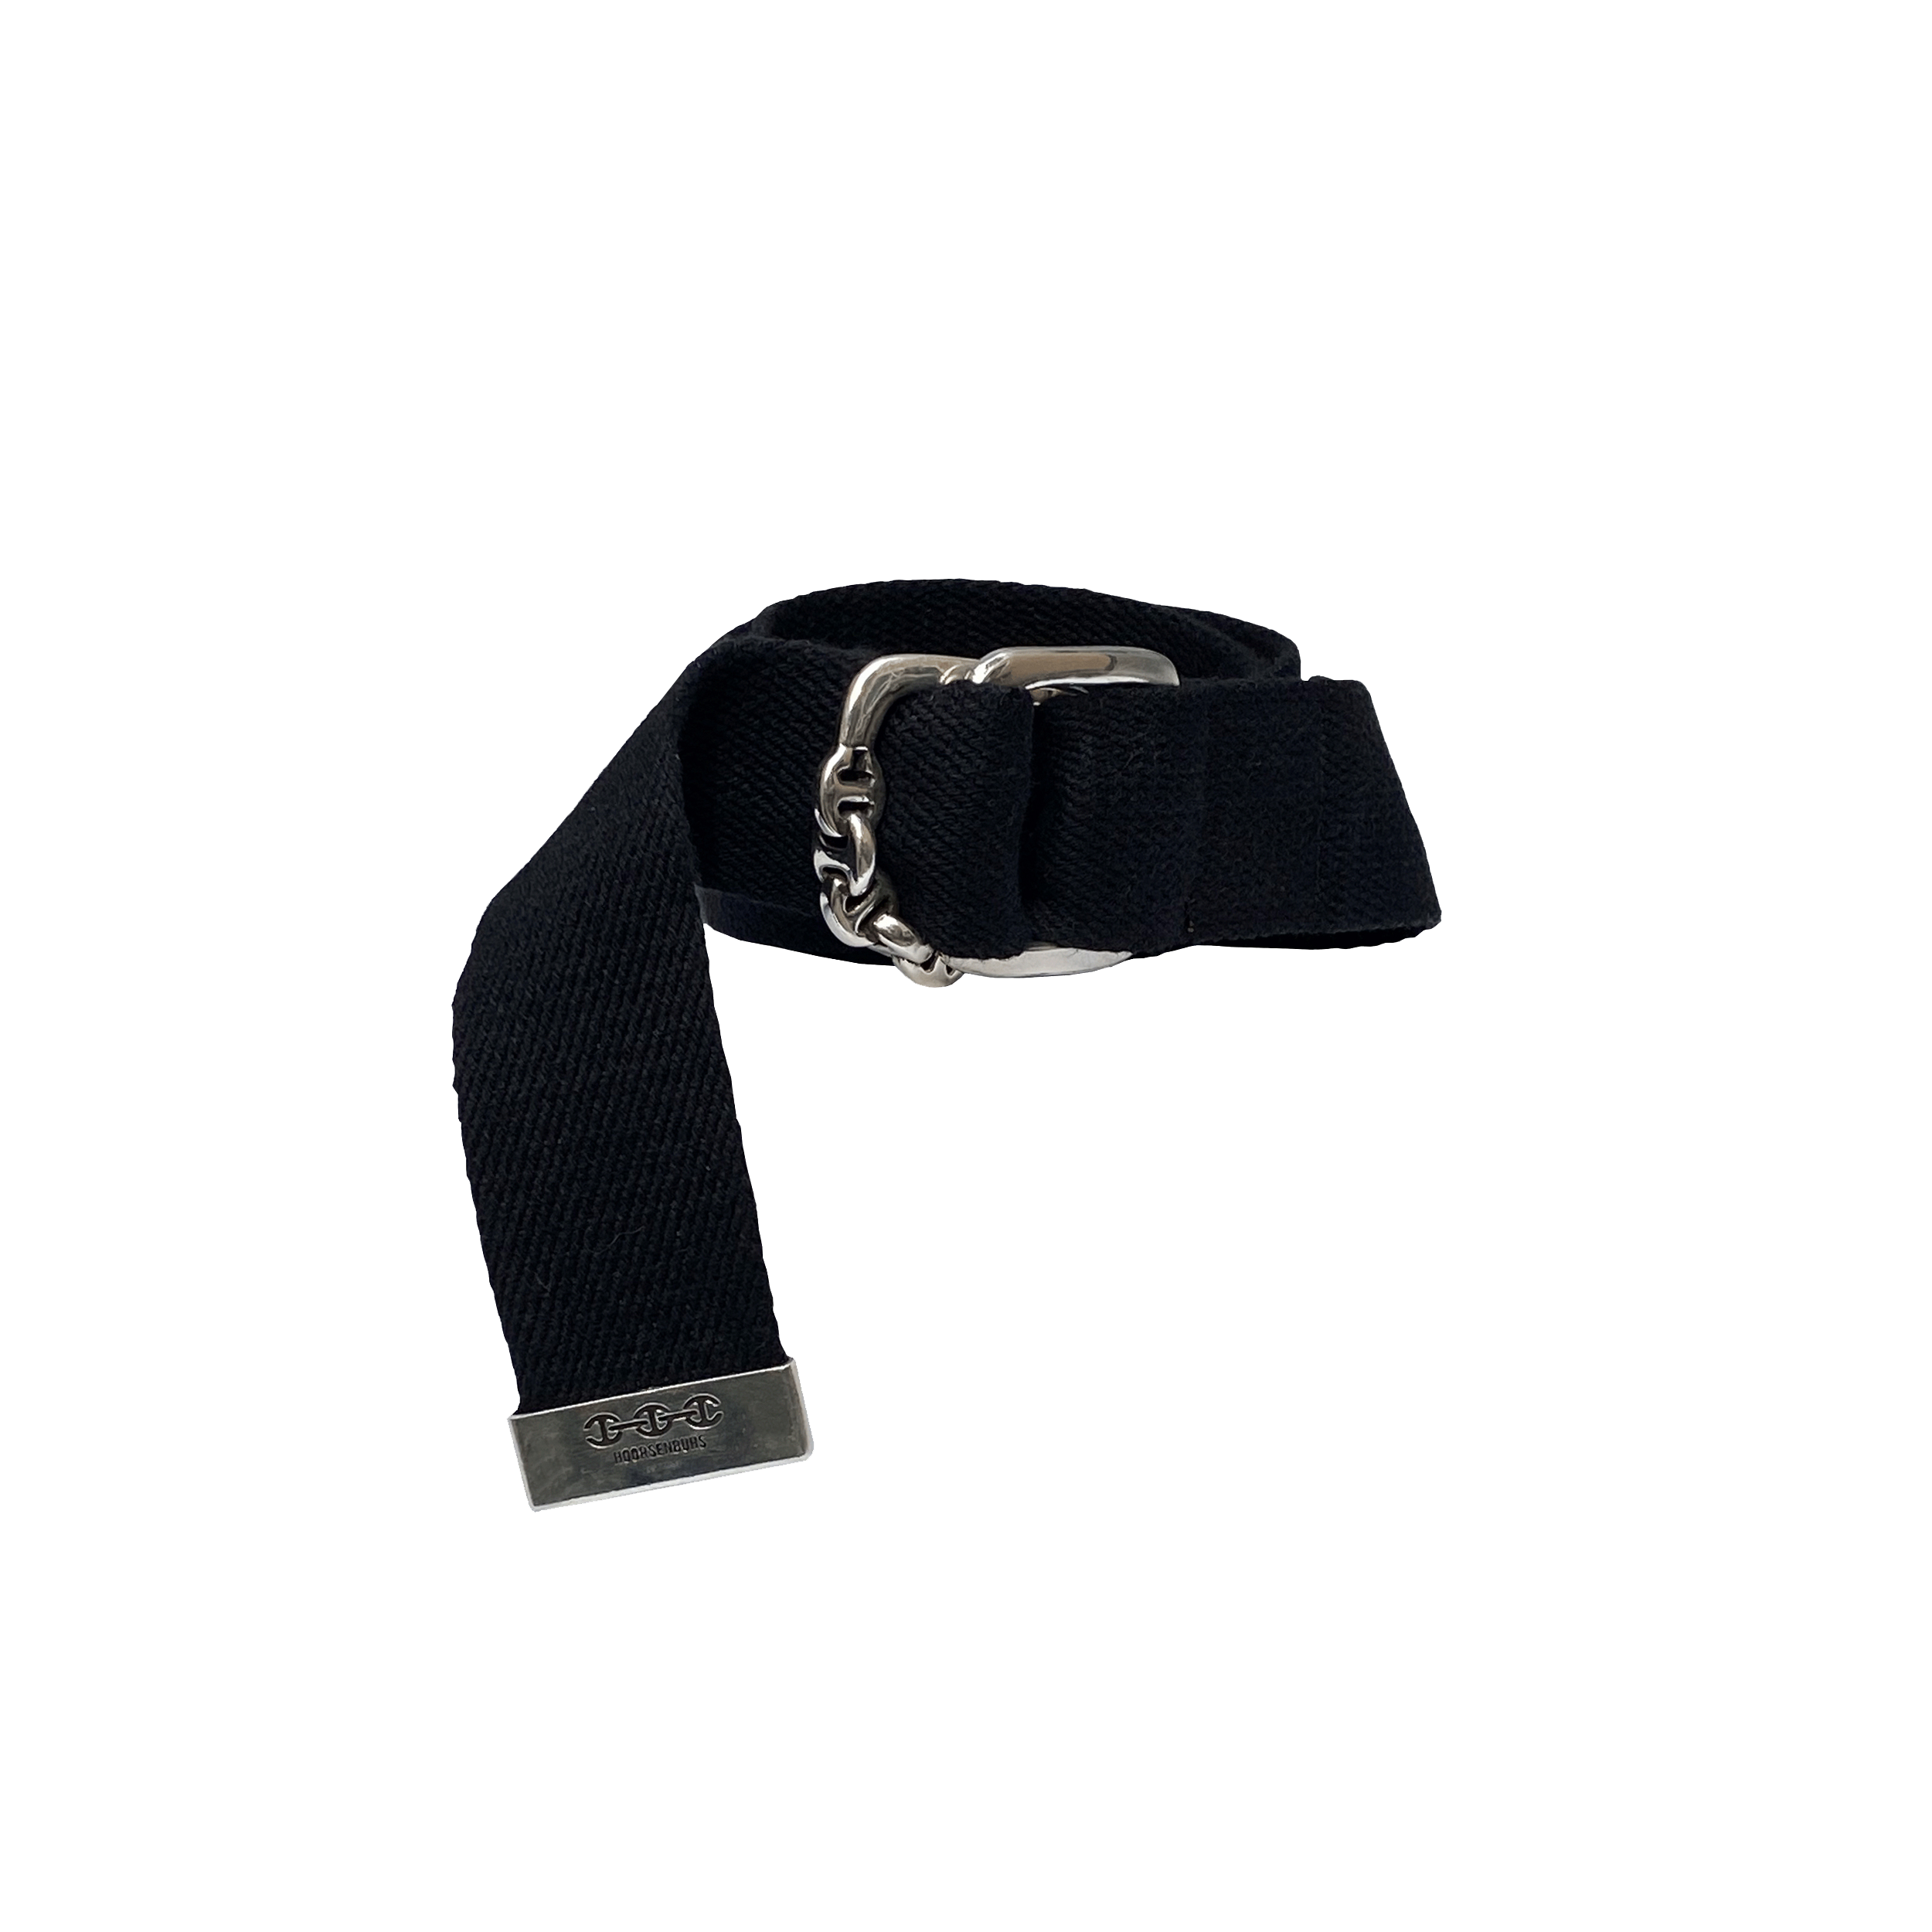 ForAllApparel Black and White Checkered Belt with D Ring Buckle